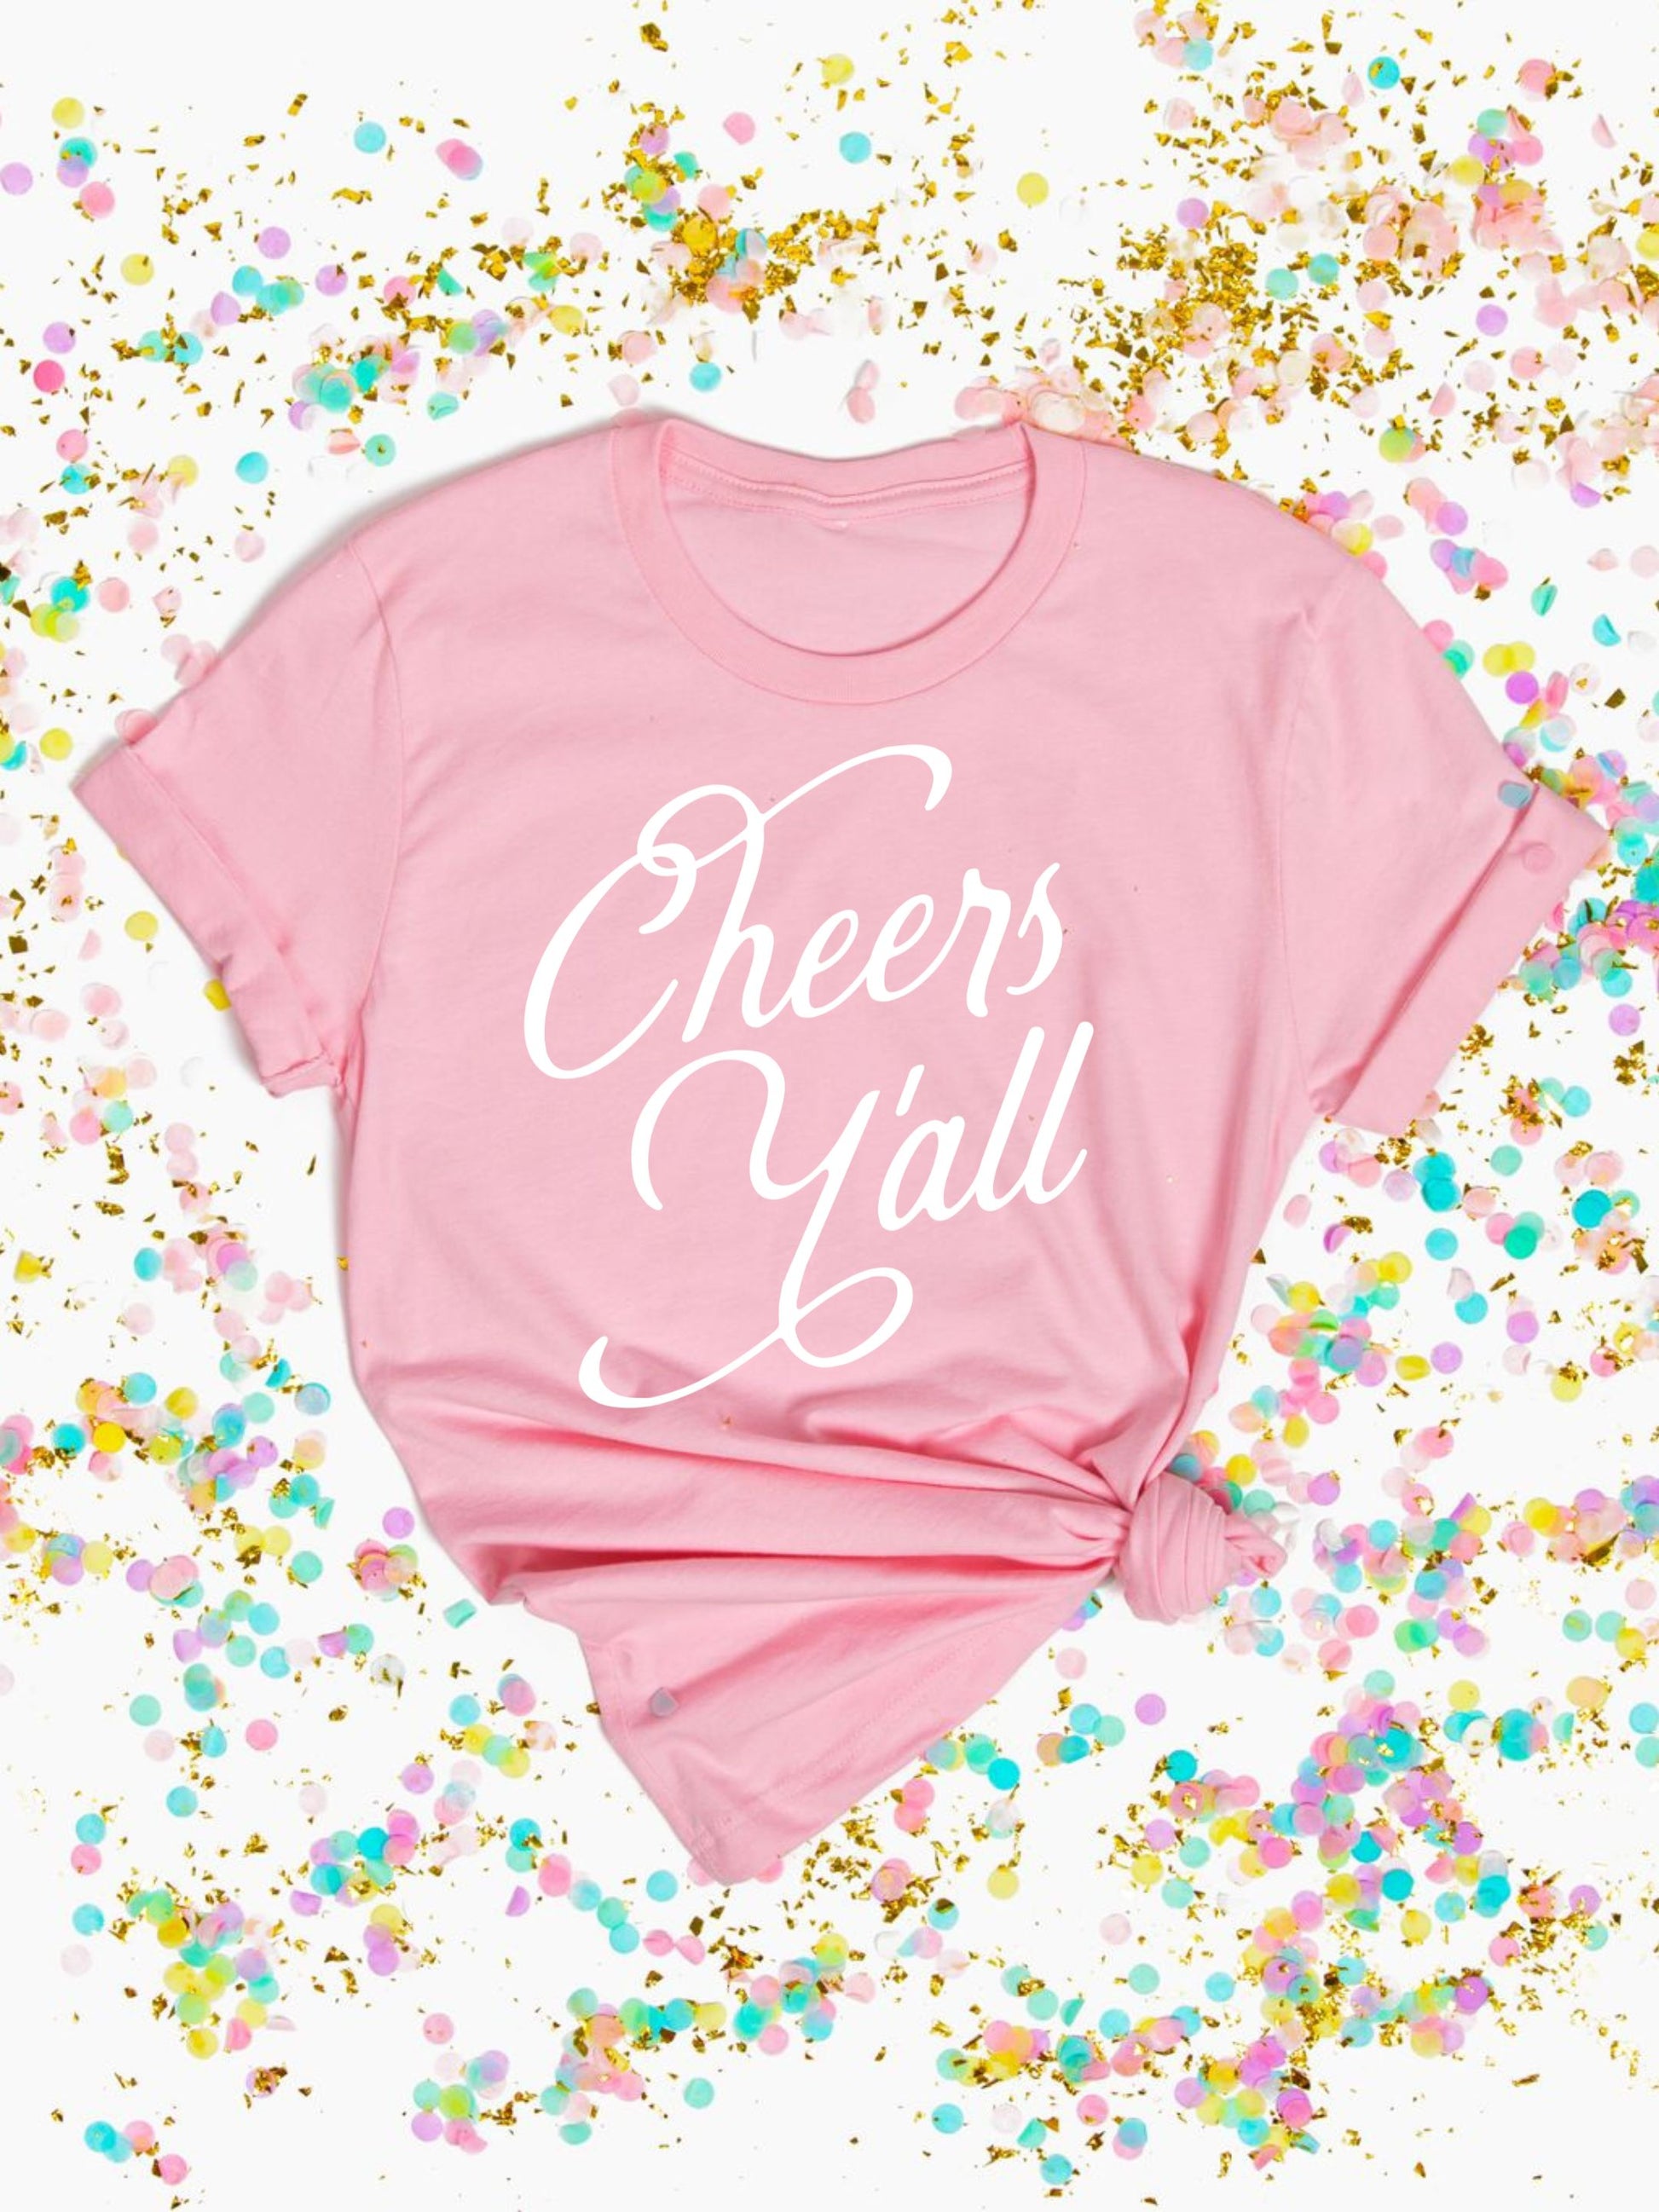 Cheers Y'all T-Shirt in color pink for girls trip 